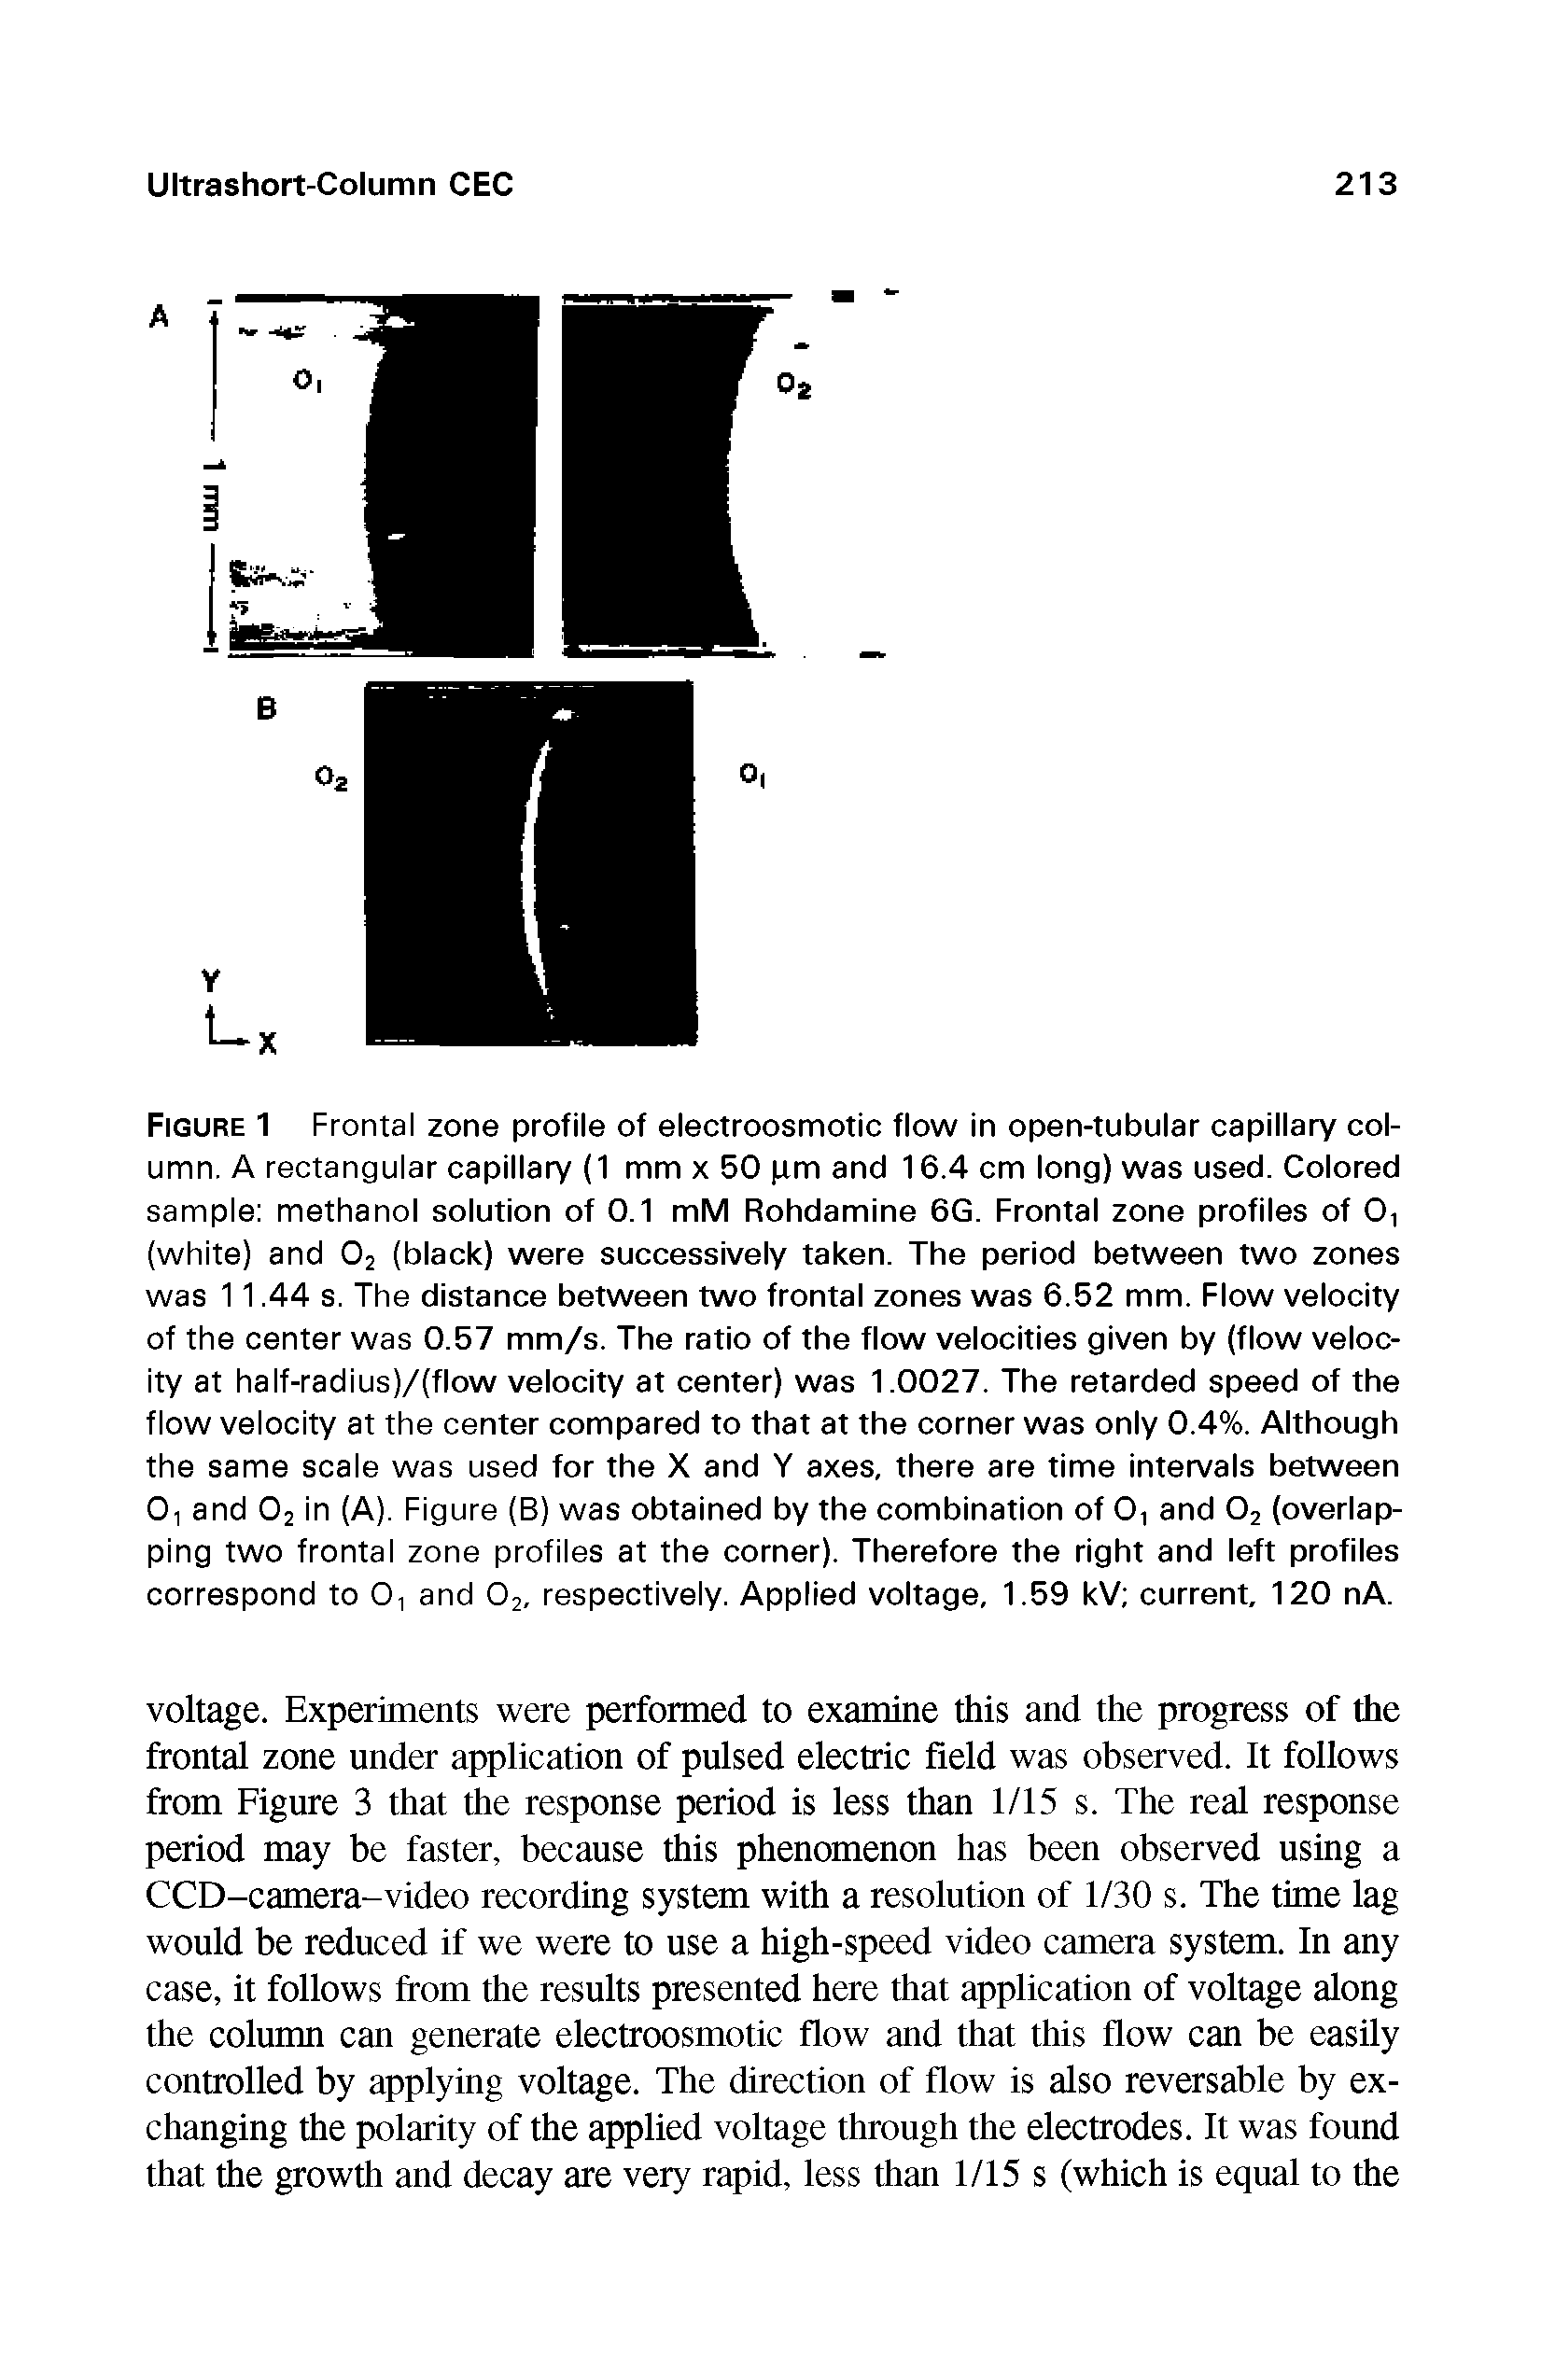 Figure 1 Frontal zone profile of electroosmotic flow in open-tubular capillary column. A rectangular capillary (1 mm x 50 pm and 16.4 cm long) was used. Colored sample methanol solution of 0.1 mM Rohdamine 6G. Frontal zone profiles of 0, (white) and 02 (black) were successively taken. The period between two zones was 11.44 s. The distance between two frontal zones was 6.52 mm. Flow velocity of the center was 0.57 mm/s. The ratio of the flow velocities given by (flow velocity at half-radius)/(flow velocity at center) was 1.0027. The retarded speed of the flow velocity at the center compared to that at the corner was only 0.4%. Although the same scale was used for the X and Y axes, there are time intervals between 0, and 02 in (A). Figure (B) was obtained by the combination of 0, and 02 (overlapping two frontal zone profiles at the corner). Therefore the right and left profiles correspond to 0, and 02, respectively. Applied voltage, 1.59 kV current, 120 nA.